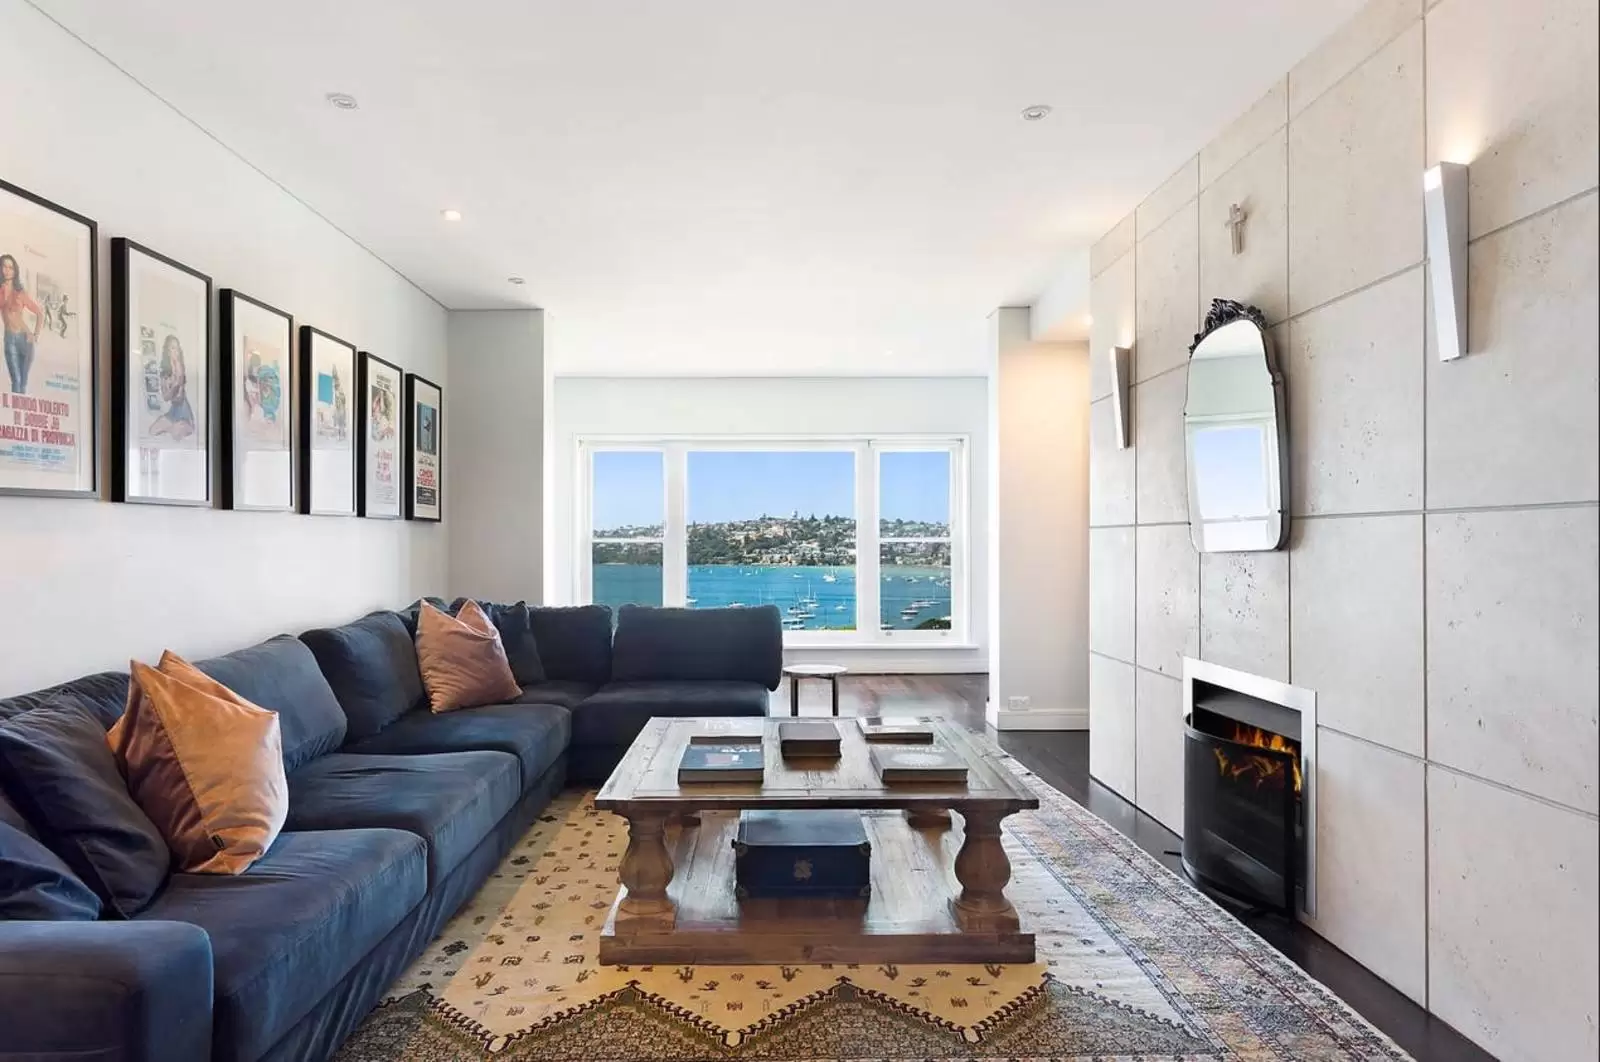 2/6 Aston Gardens, Bellevue Hill For Lease by Sydney Sotheby's International Realty - image 2